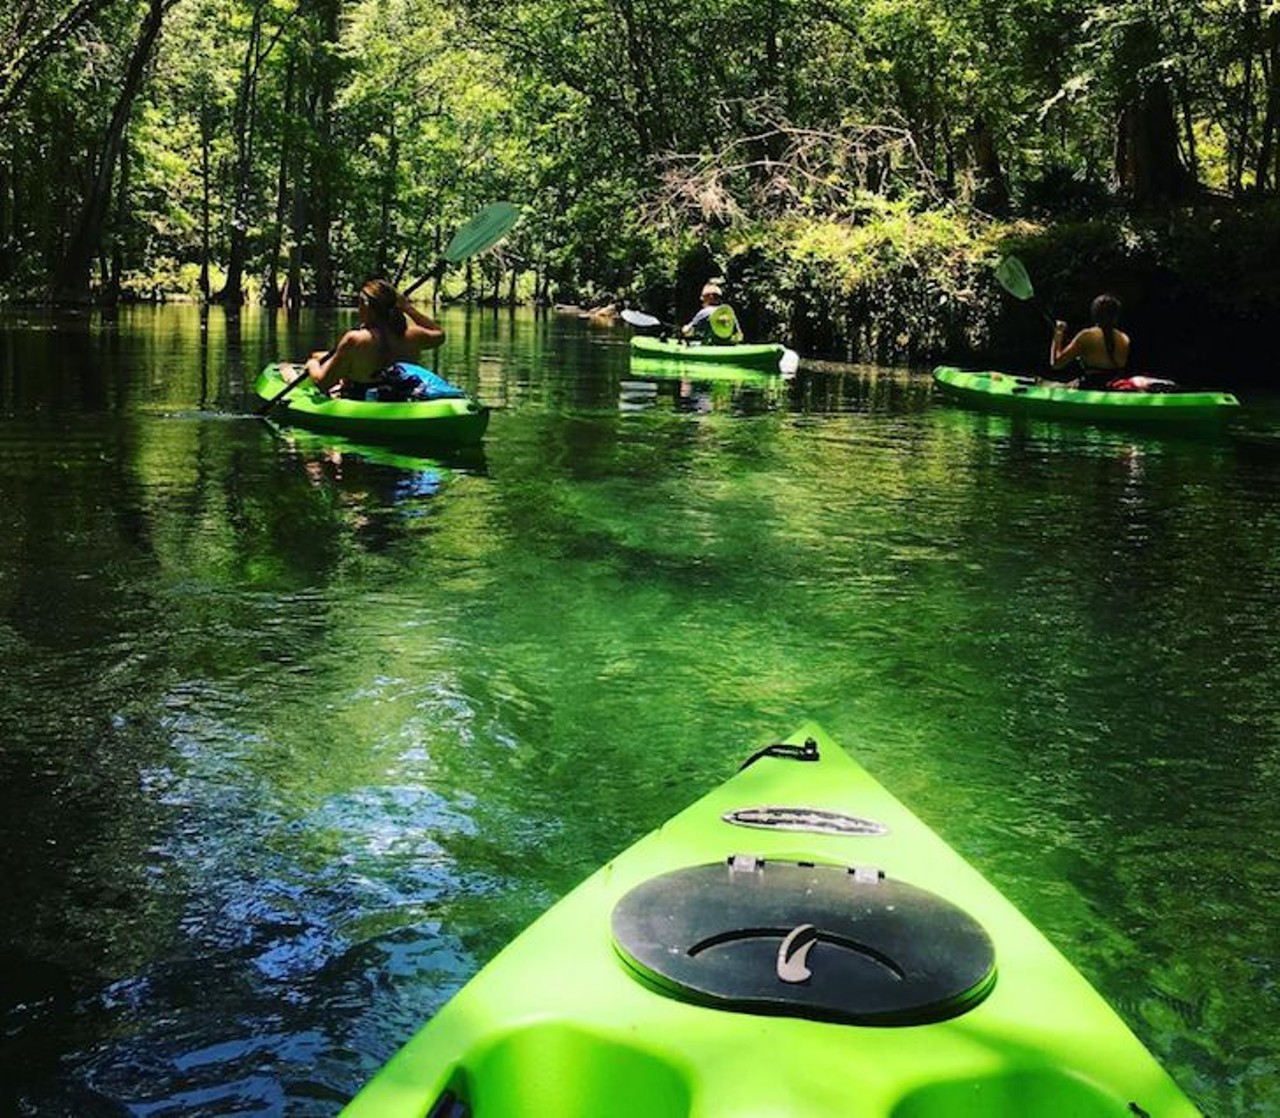 Juniper Springs Recreation Area | Ocala National Forest
Place to rent: Juniper Springs Recreation Area 
352-625-2808, 26701 E. Highway 40, Silver Springs
Estimated driving distance from Orlando: about 1 hour 20 minutes
If you canoe down the 7-mile stretch down Juniper Run, it&#146;ll take you through the Juniper Prairie Wilderness. You might see some cute otters, but you might want to watch a bit more closely for gators that might be lurking in the shallow water. For $35 plus tax, in addition to a $25 refundable deposit, you can rent a canoe for the day. Shuttle services to help with transporting the equipment back to the rental site are also included in the price.
Photo via theabercrombieteam/Instagram